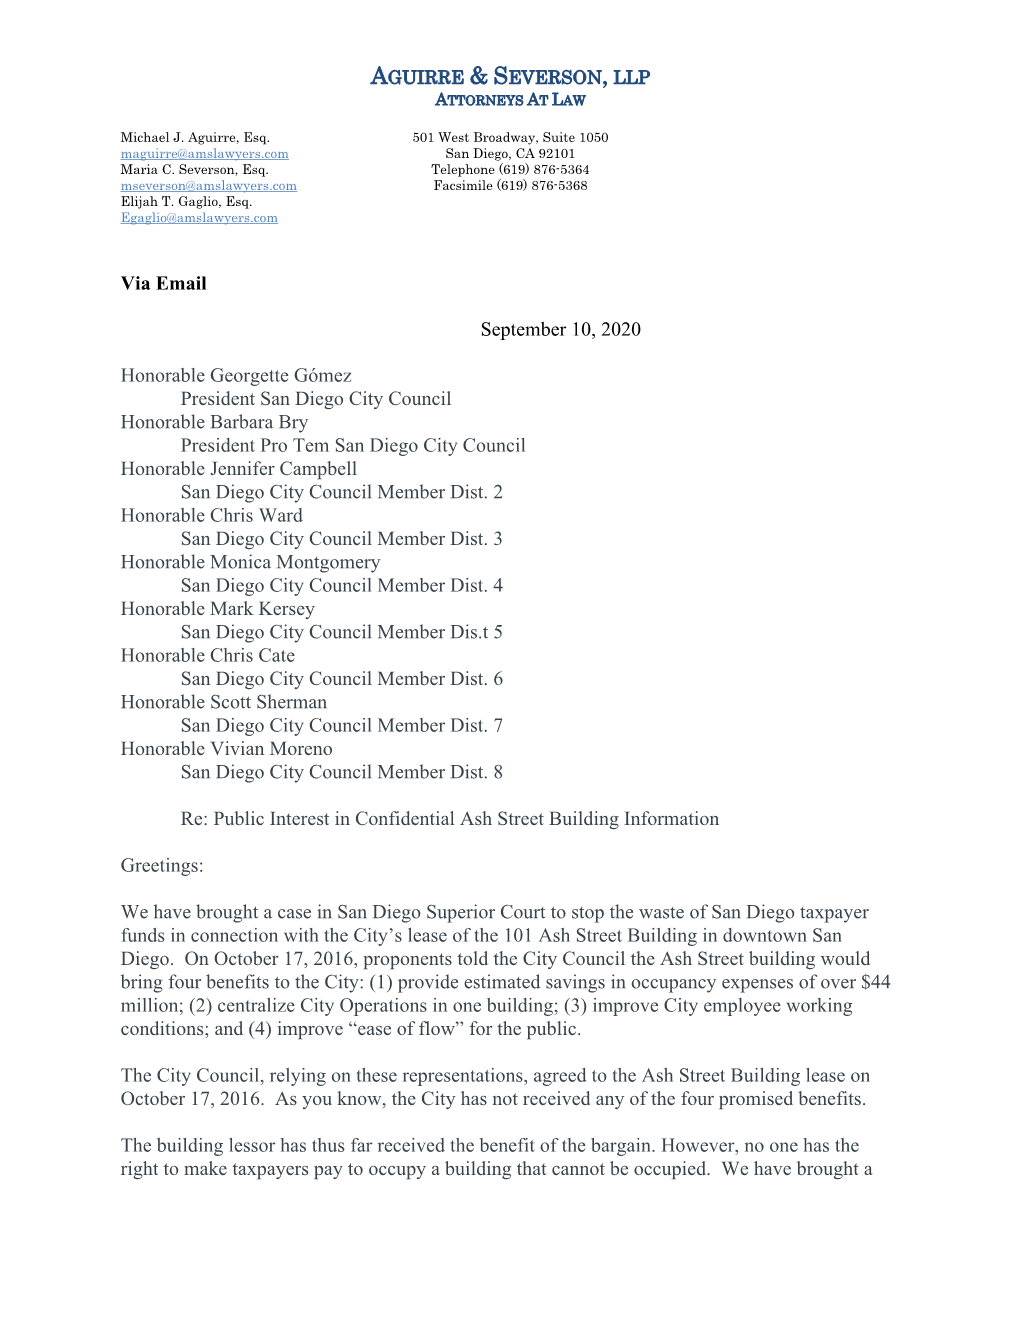 AS-Letter-To-City-Council-9-10-20.Pdf